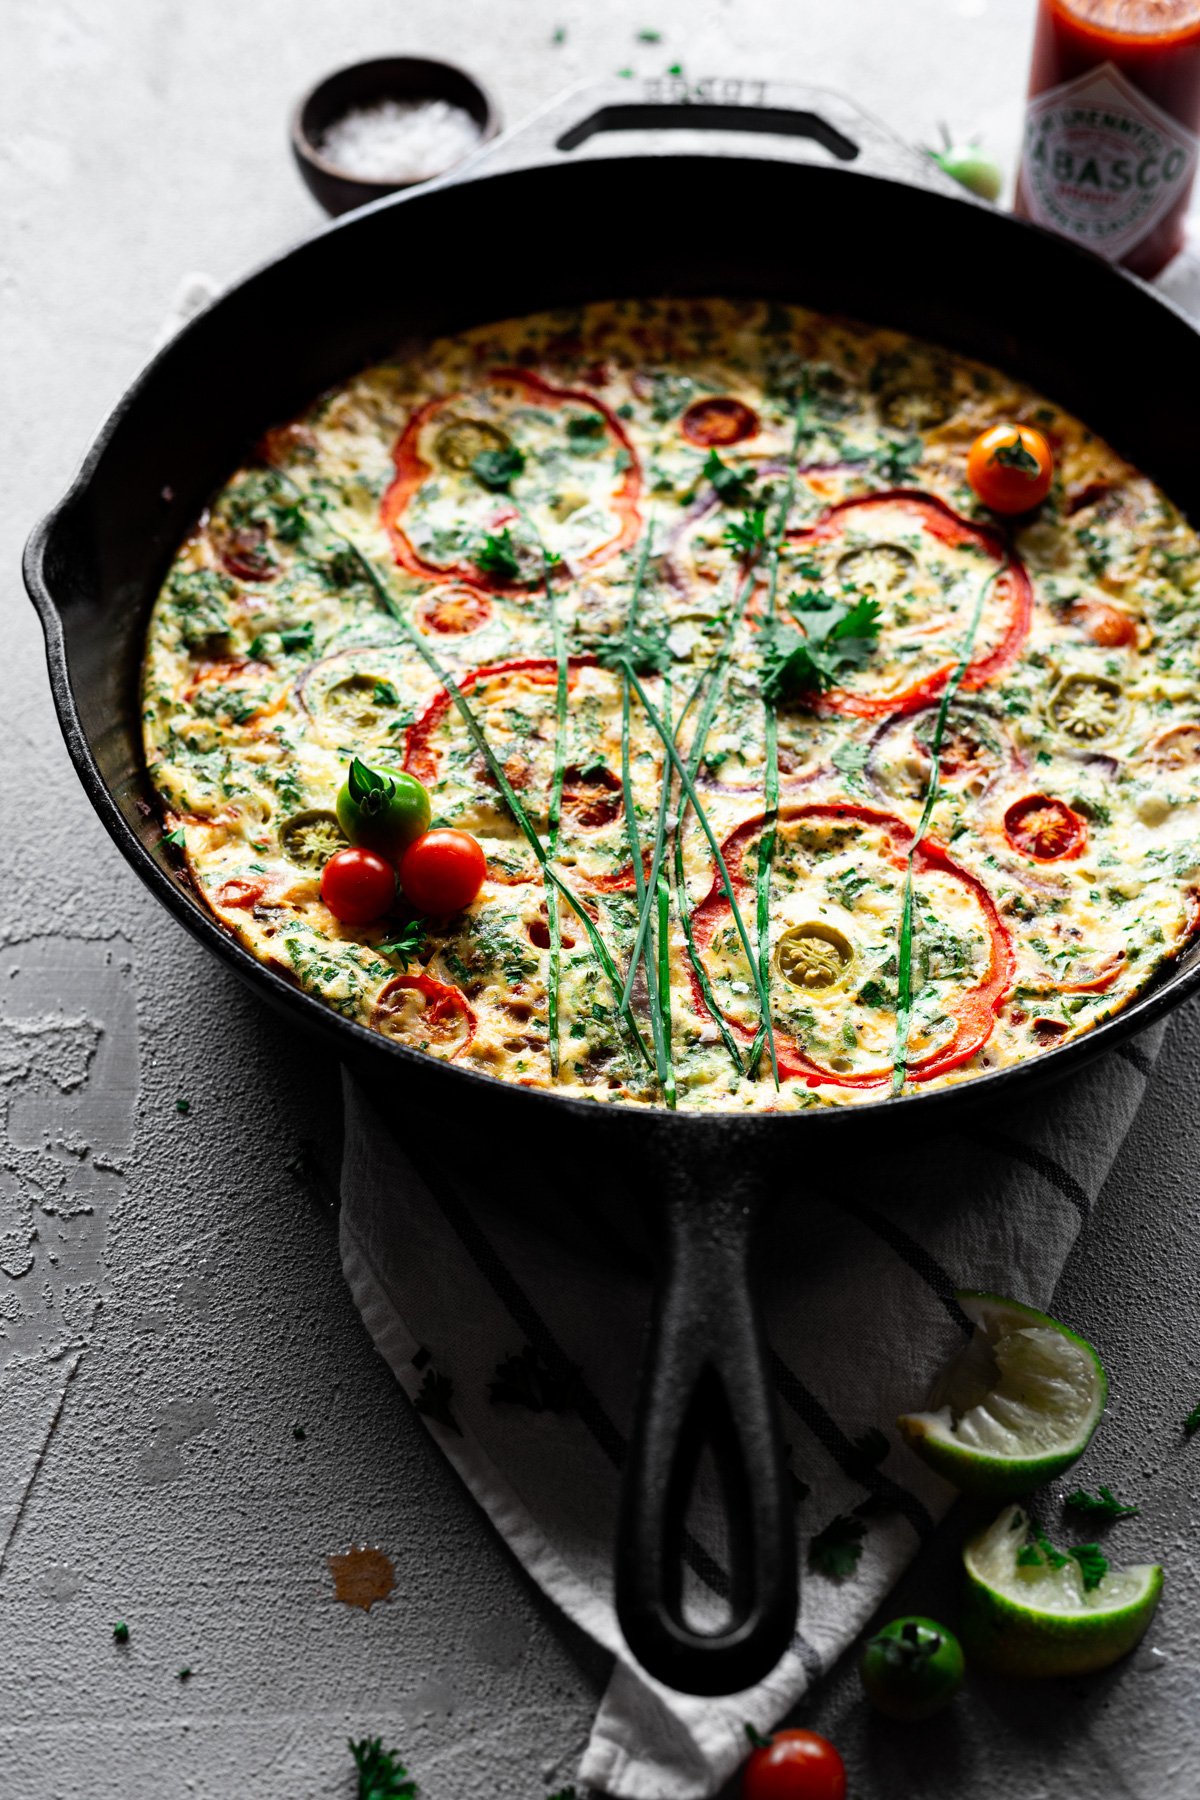 angled view of baked frittata recipe with veggies and herbs